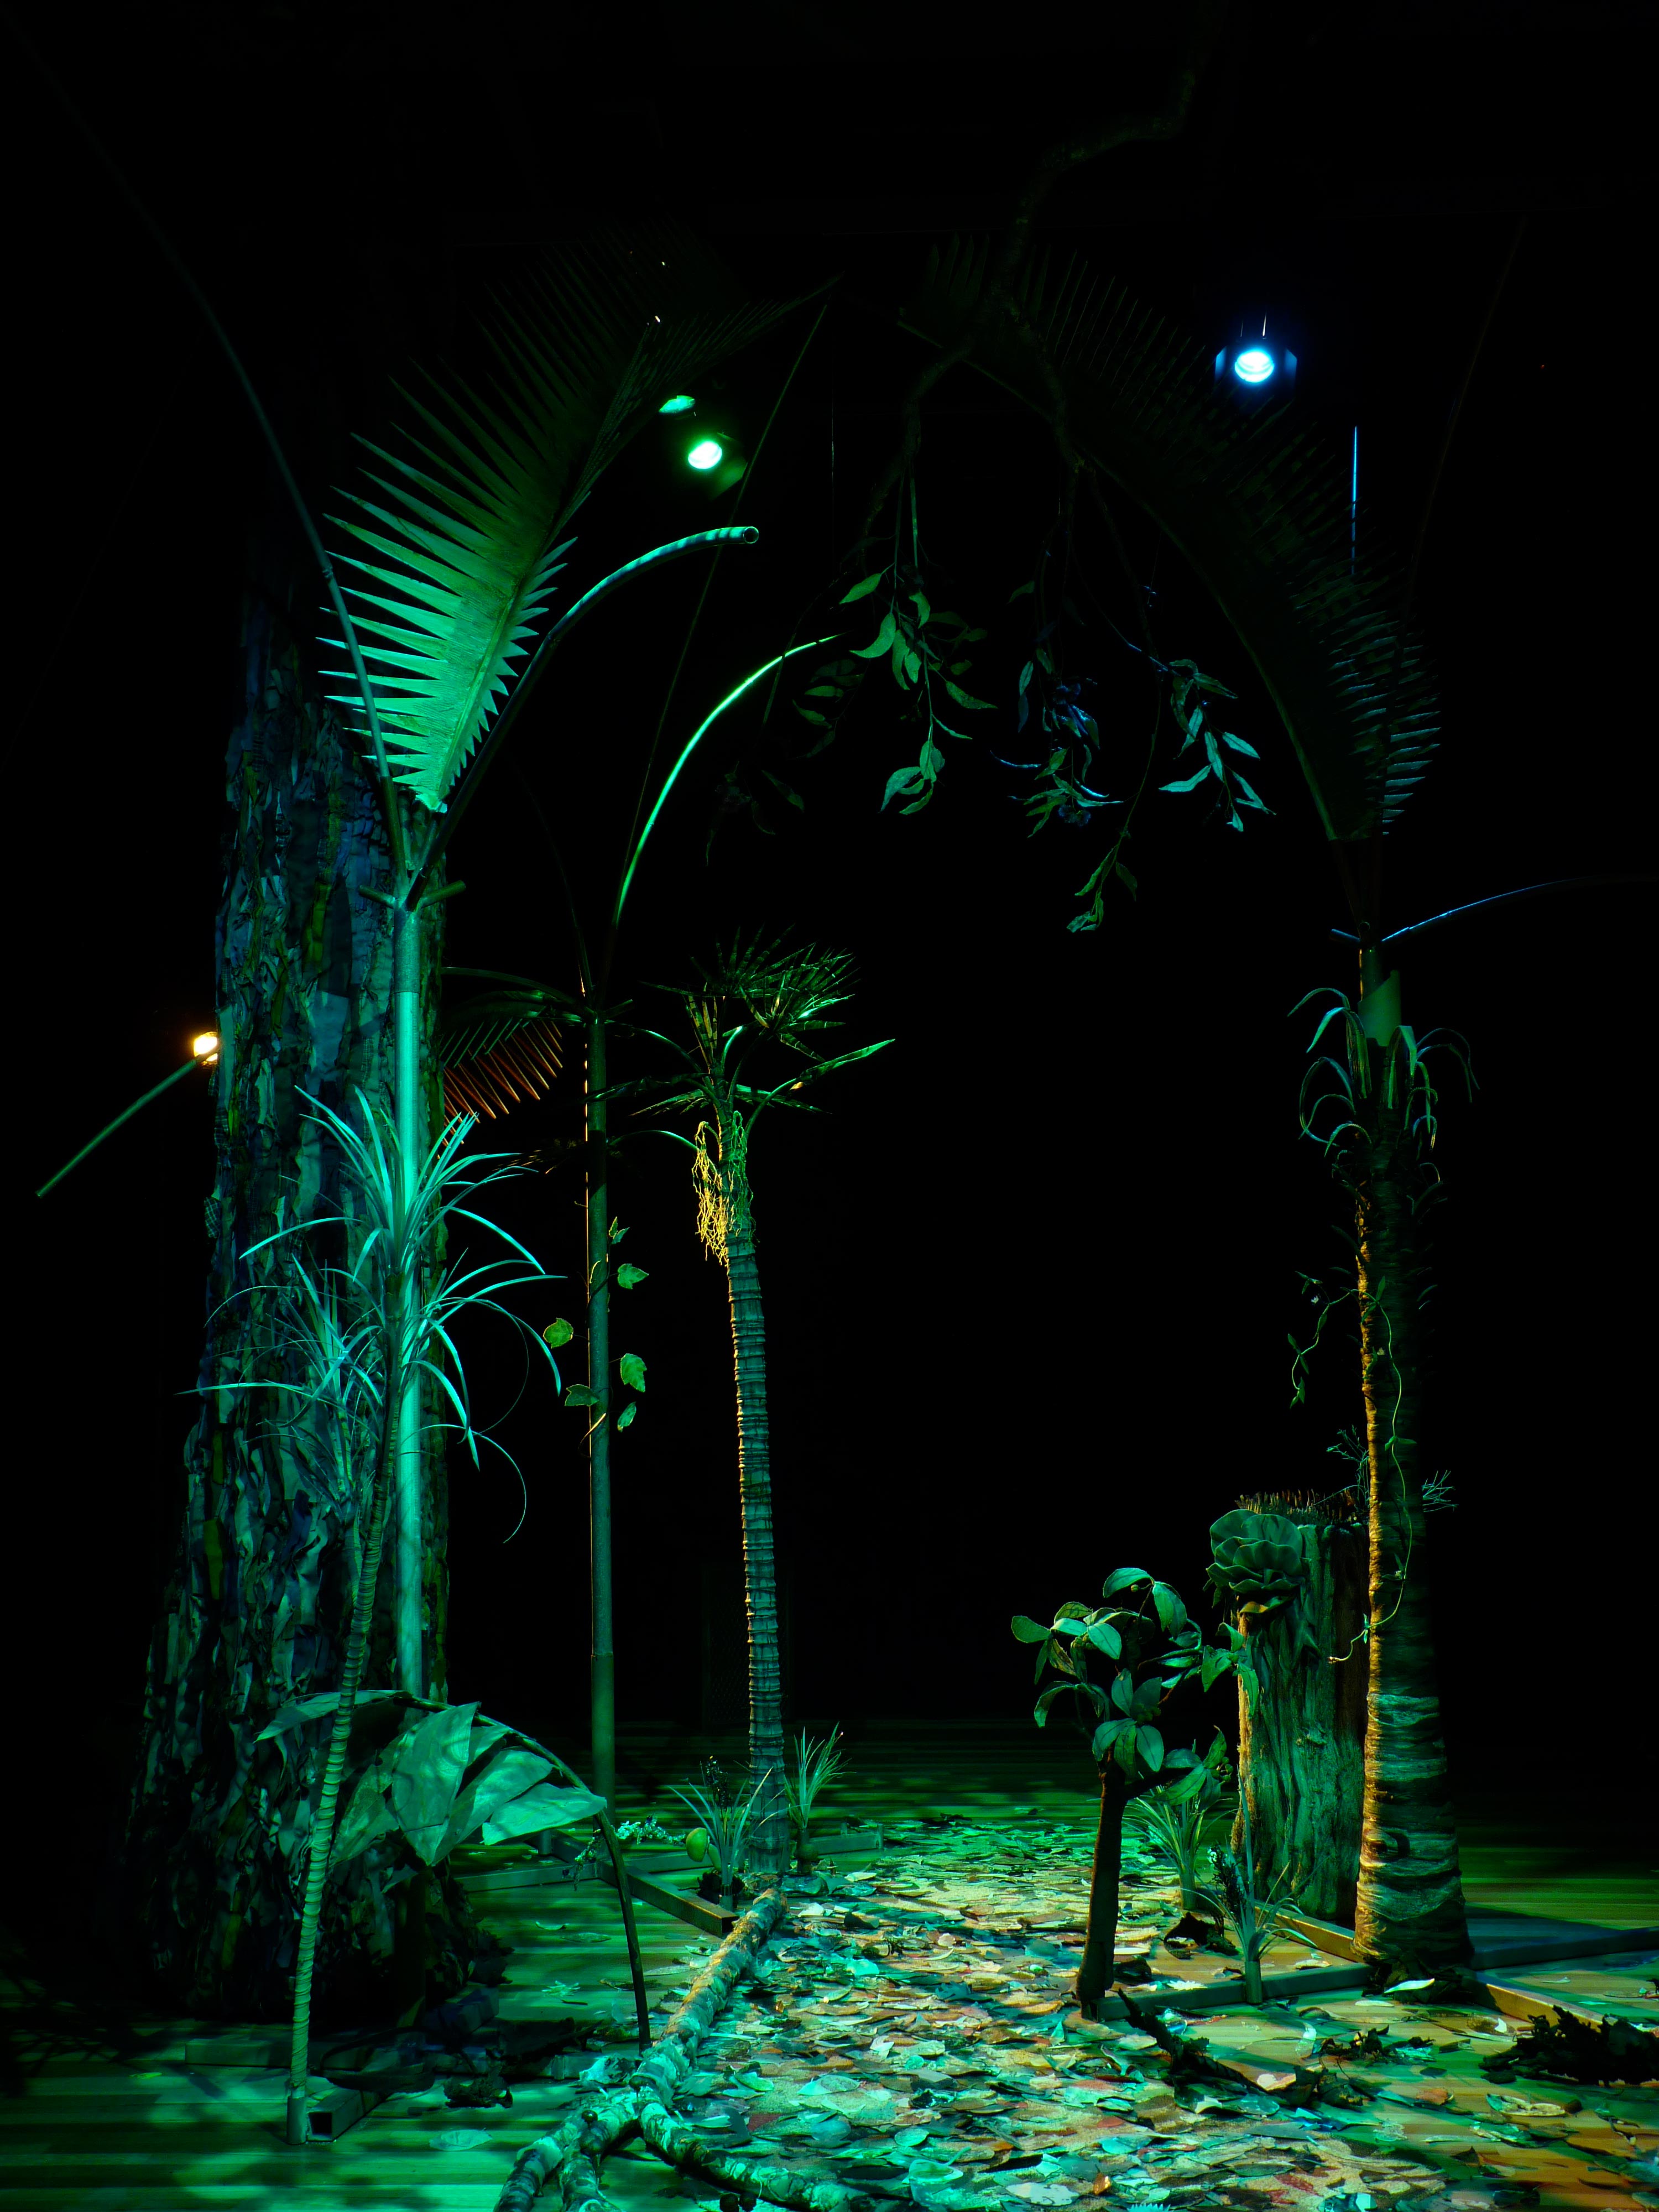 The Frugal Forest – a work in progress, displayed in March 2014 at the Glasshouse, Port Macquarie.  Photo: Chay Khamsone.